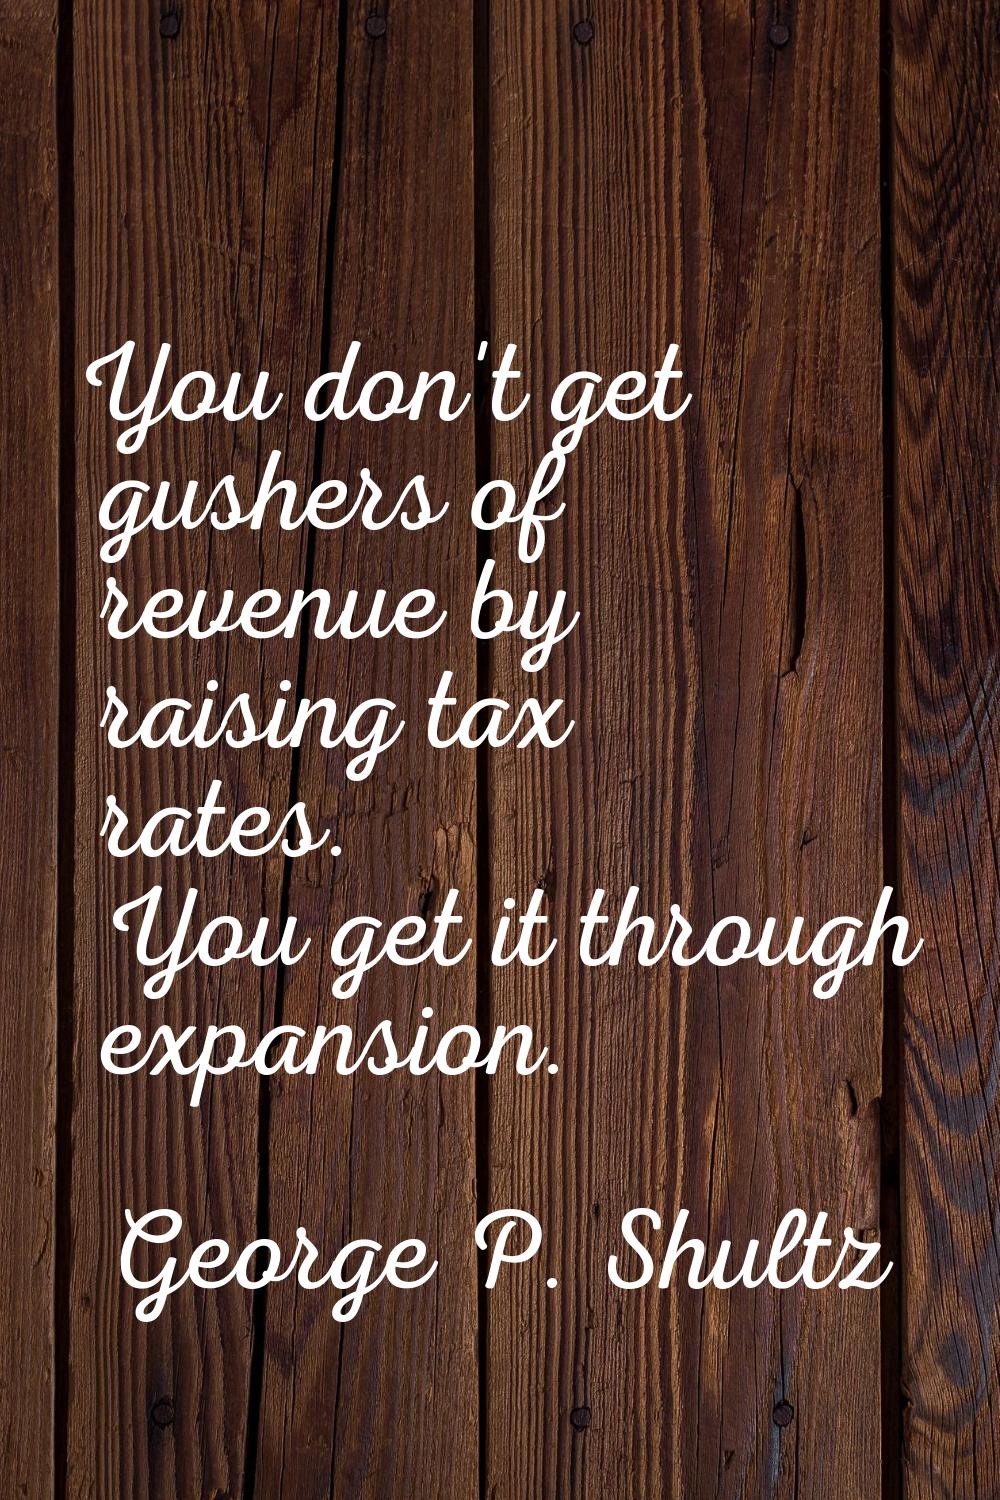 You don't get gushers of revenue by raising tax rates. You get it through expansion.